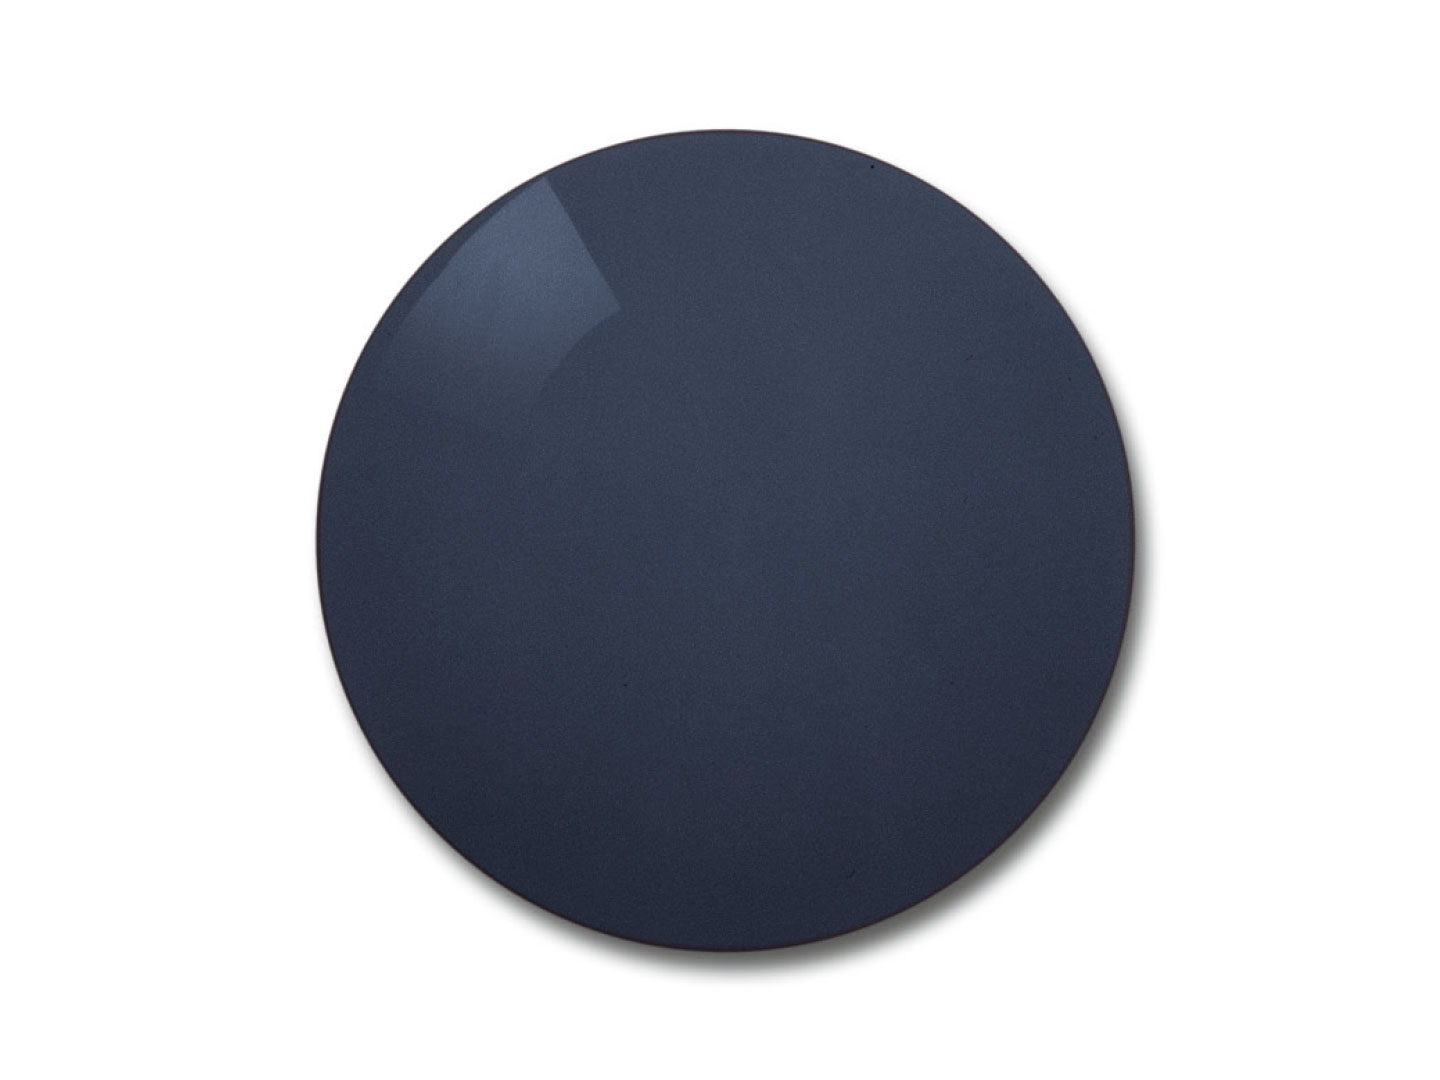 Illustration of ZEISS Polarised Lens in the colour option grey 